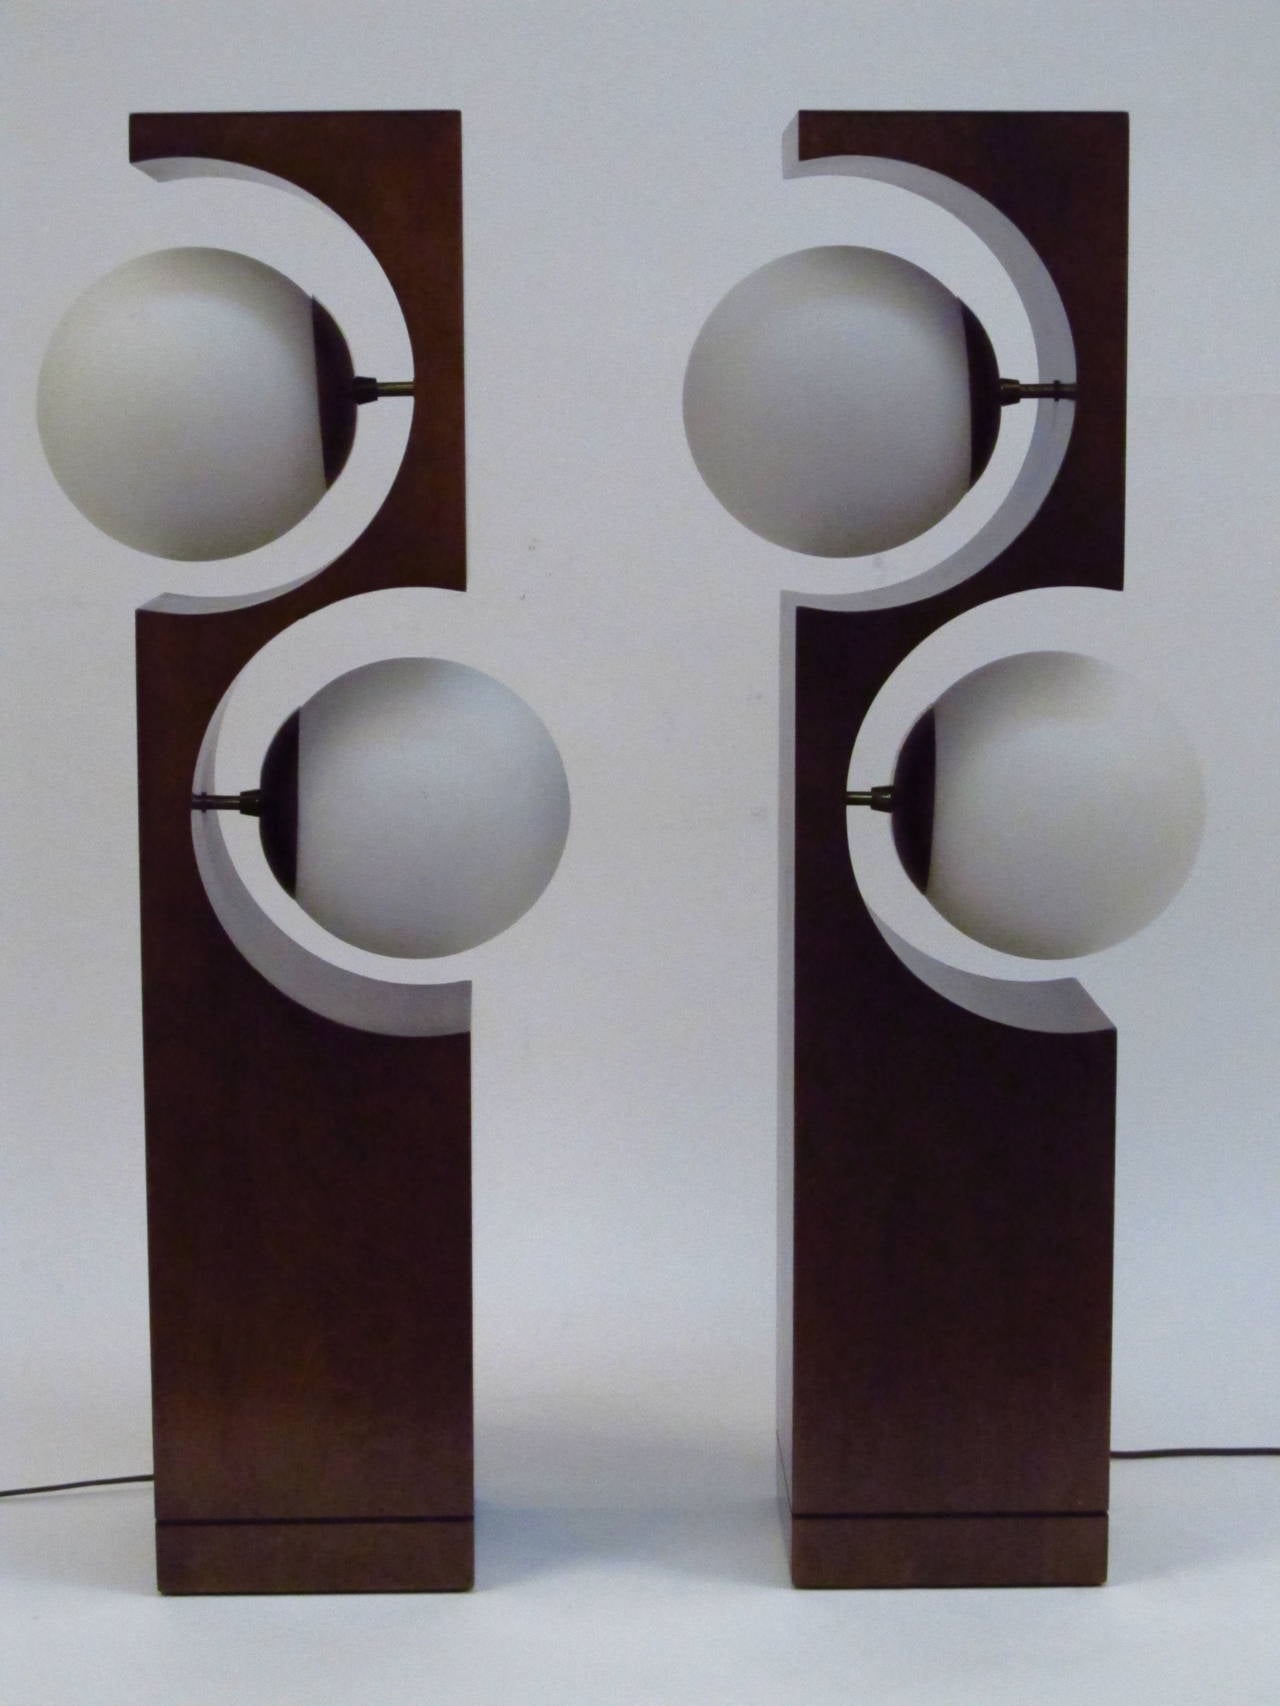 Pair of Modeline double globe table lamps. A very hip look and a pair!